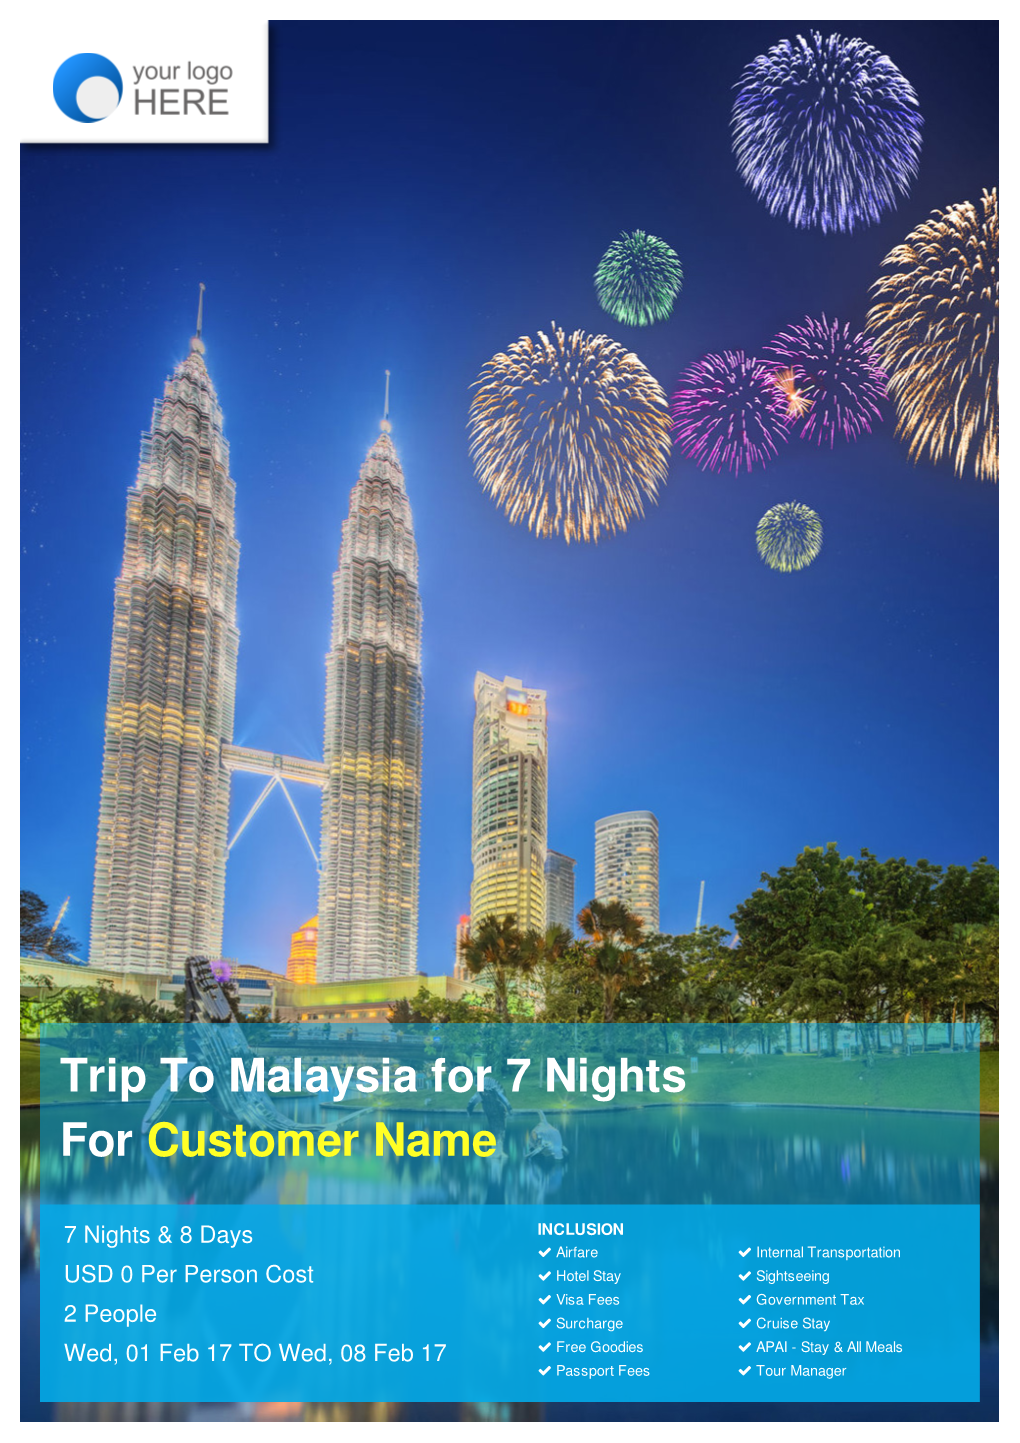 Trip to Malaysia for 7 Nights for Customer Name